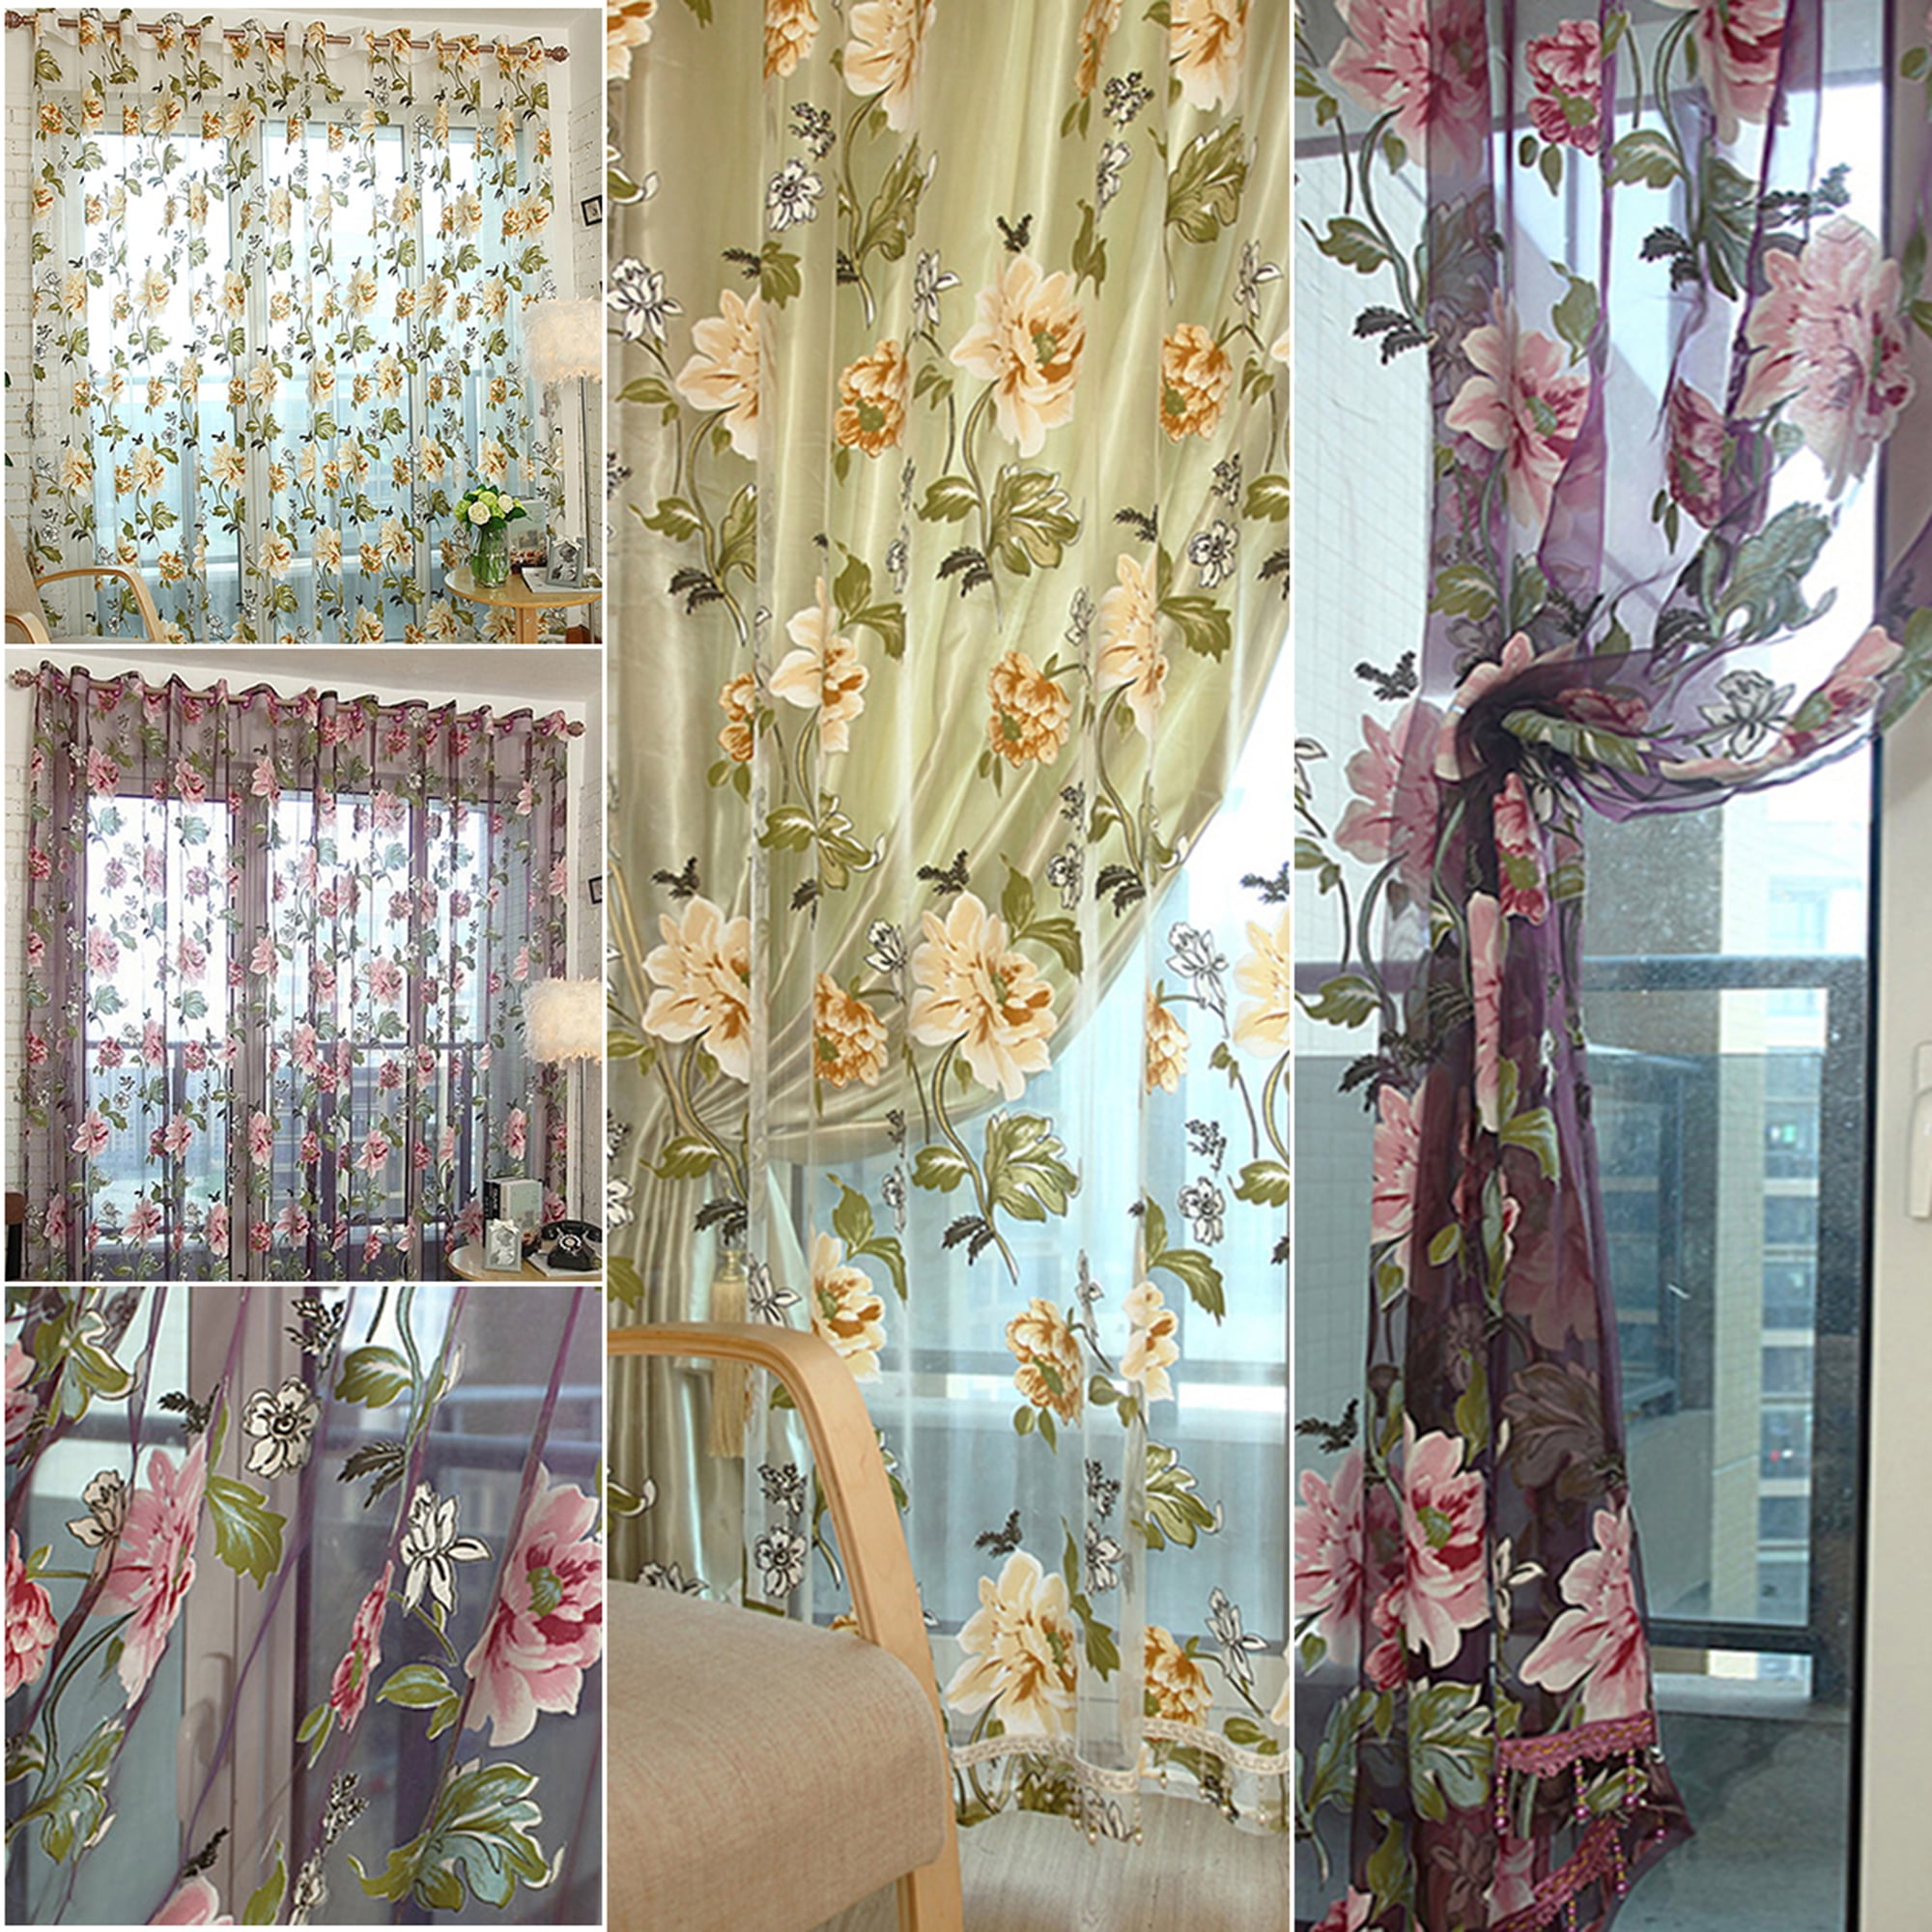 Floral Romantic Flower Window Tulle Curtains For 1PC Room Bedroom Decor LD 